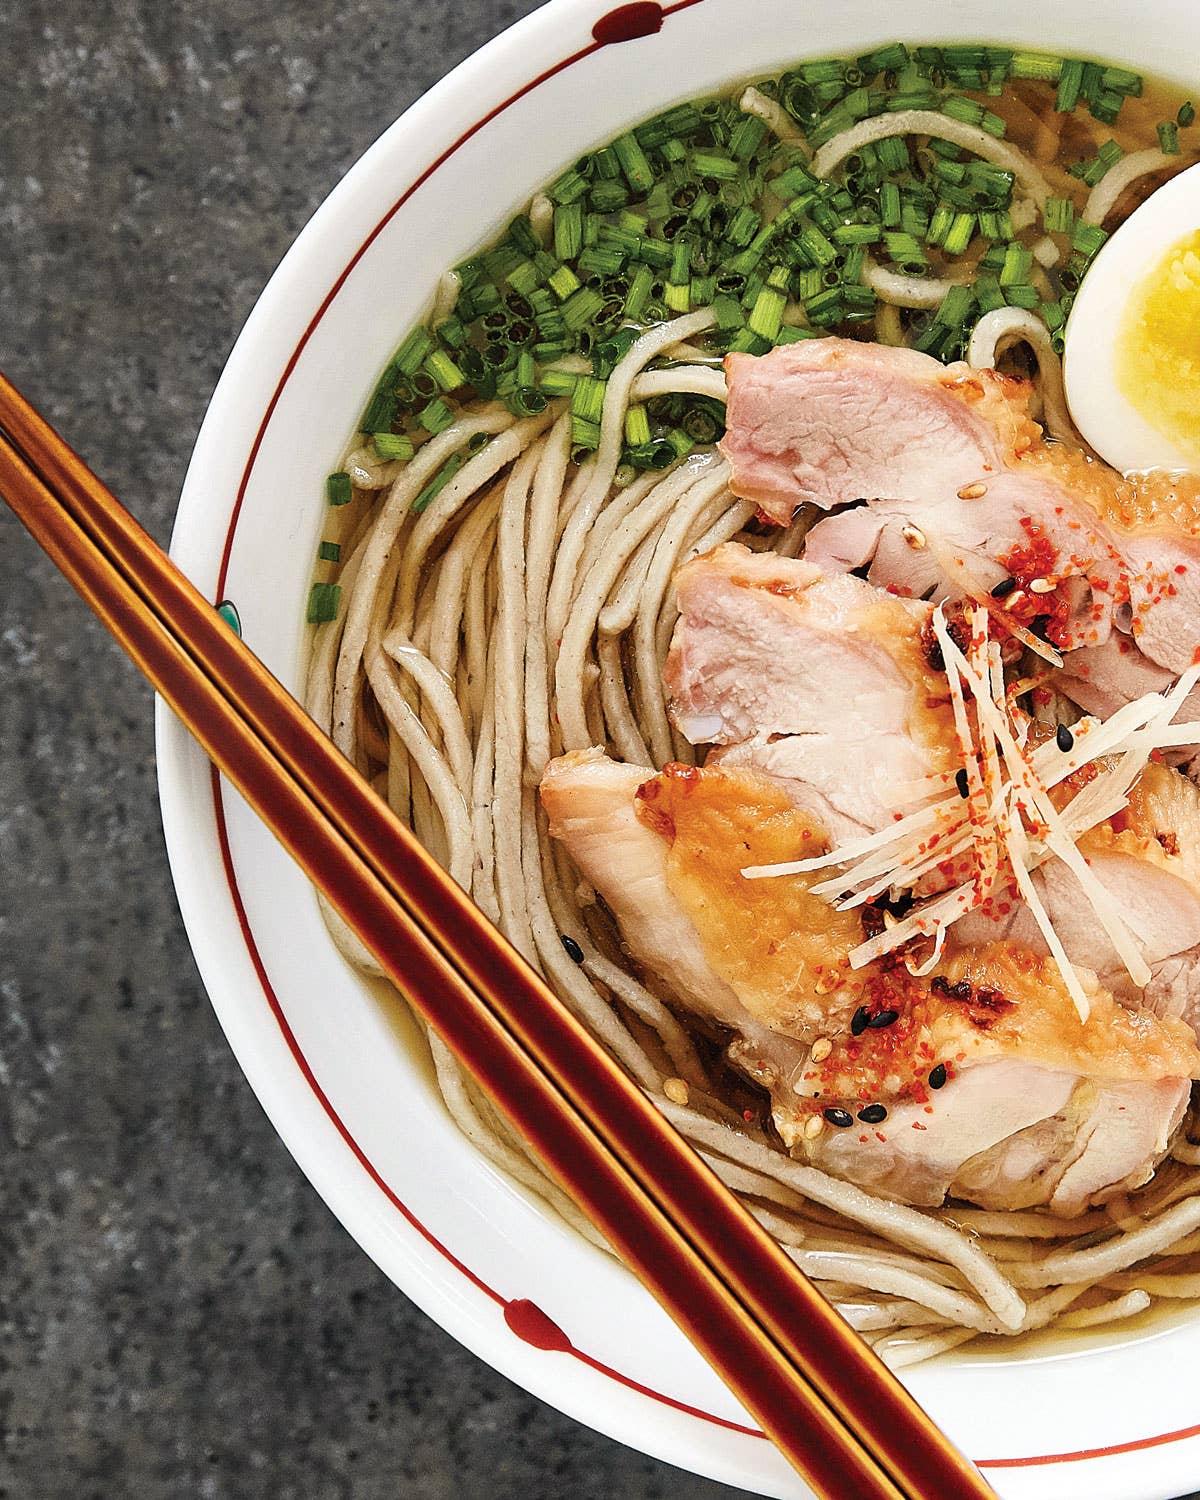 Hot Soba Noodles with Chicken and Egg